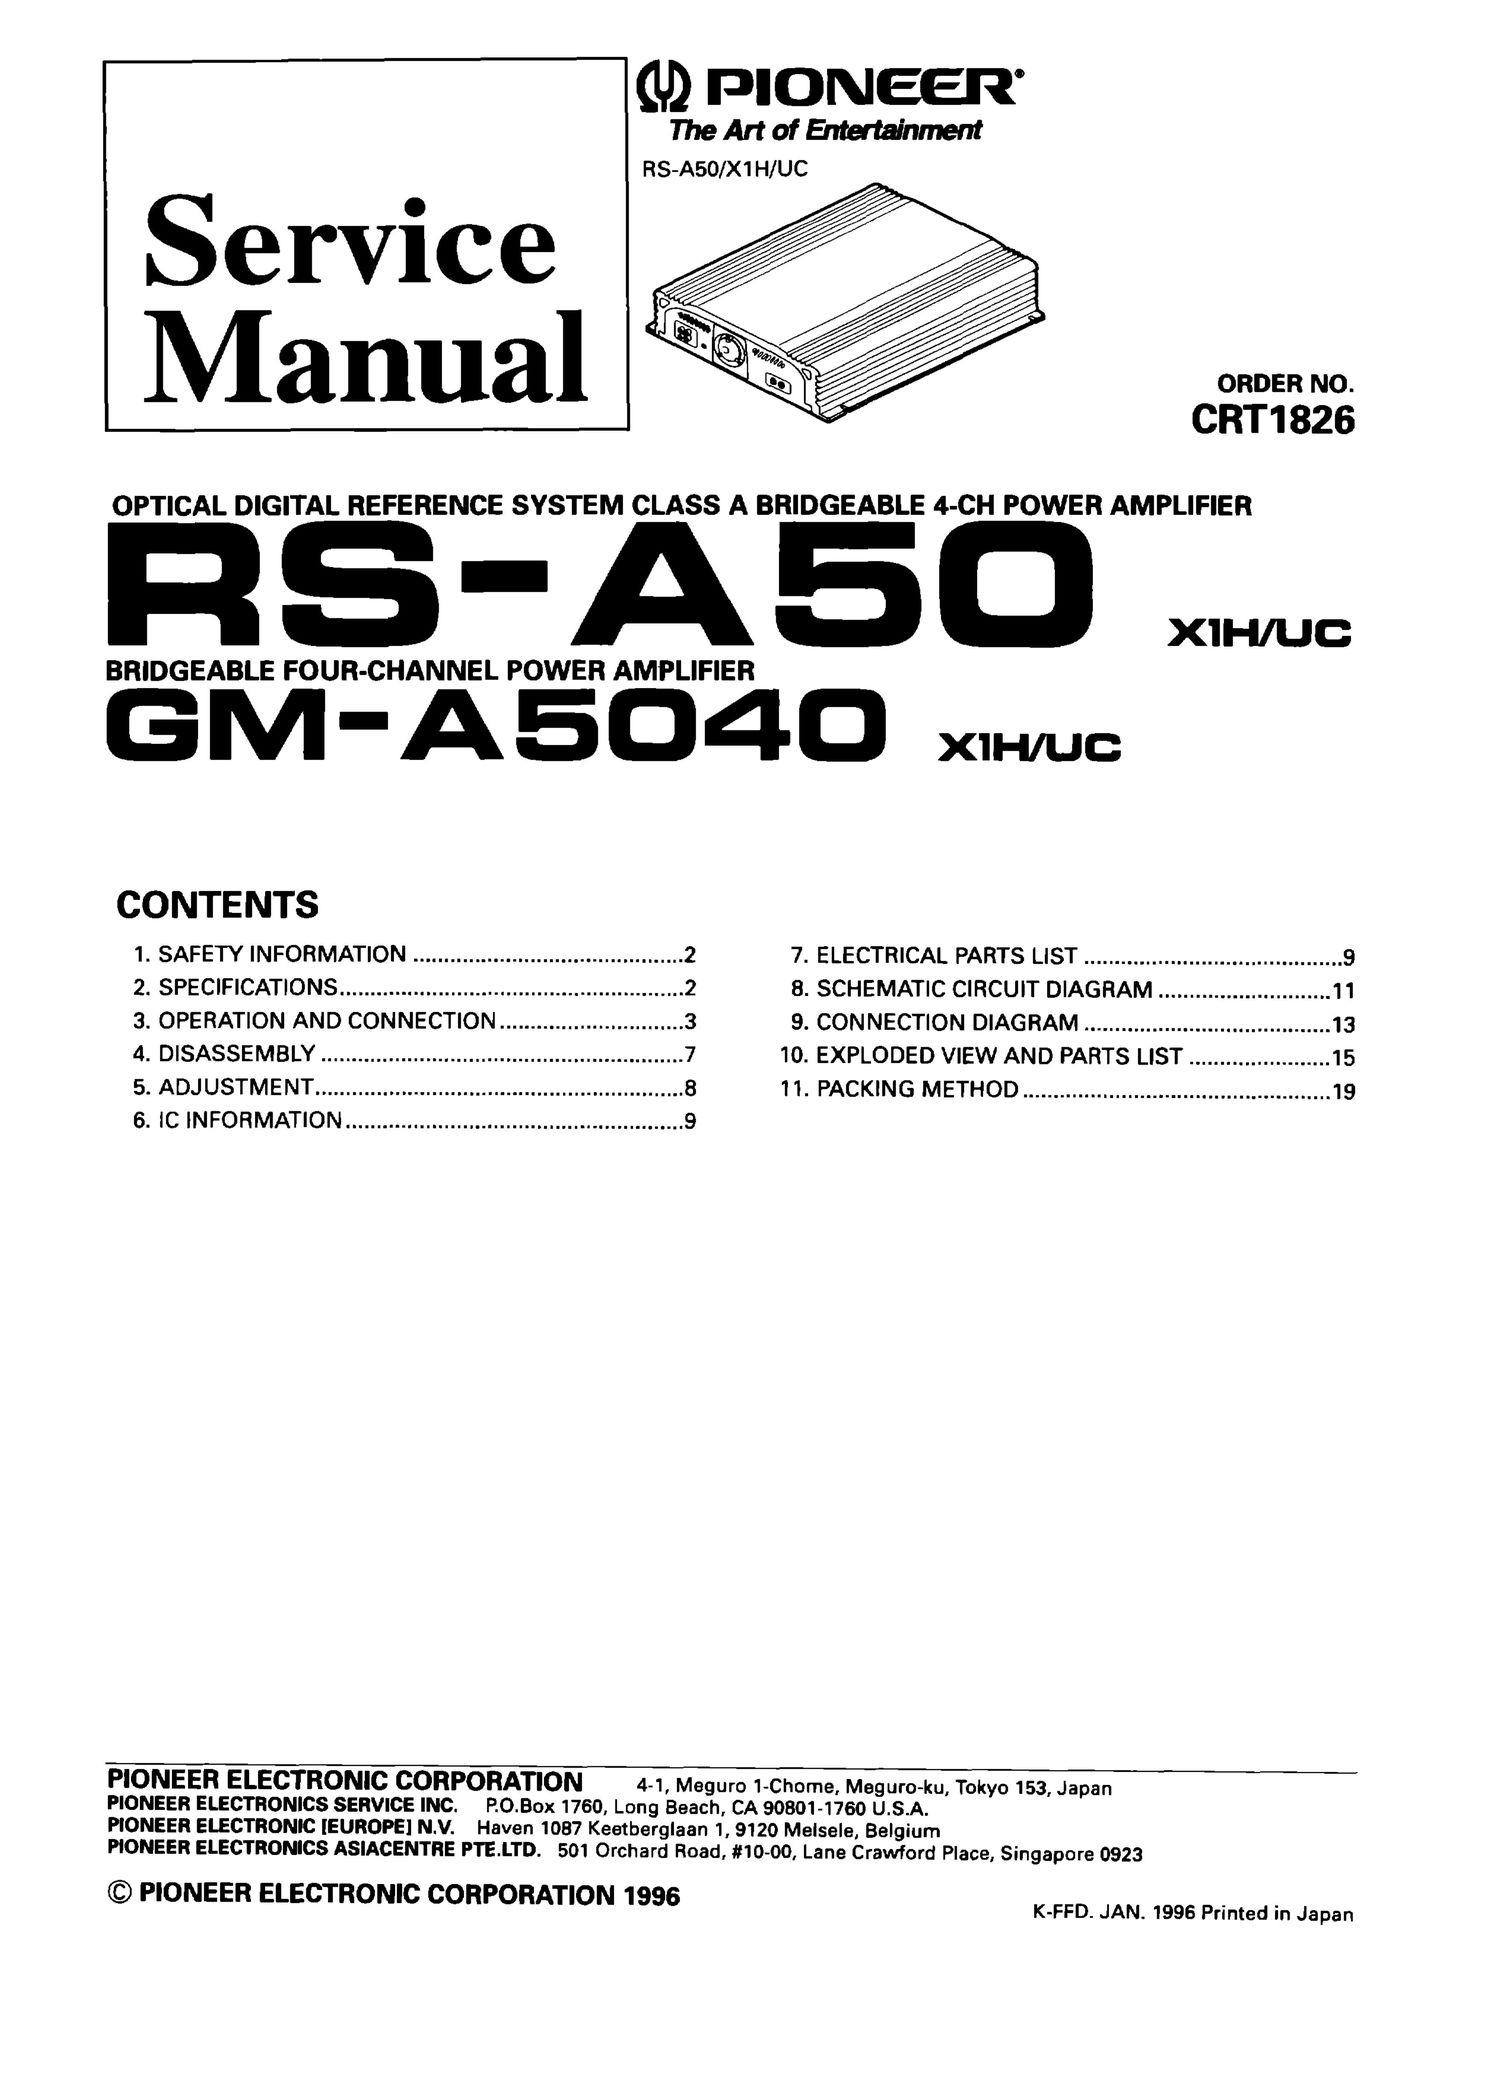 pioneer rs a50 service manual